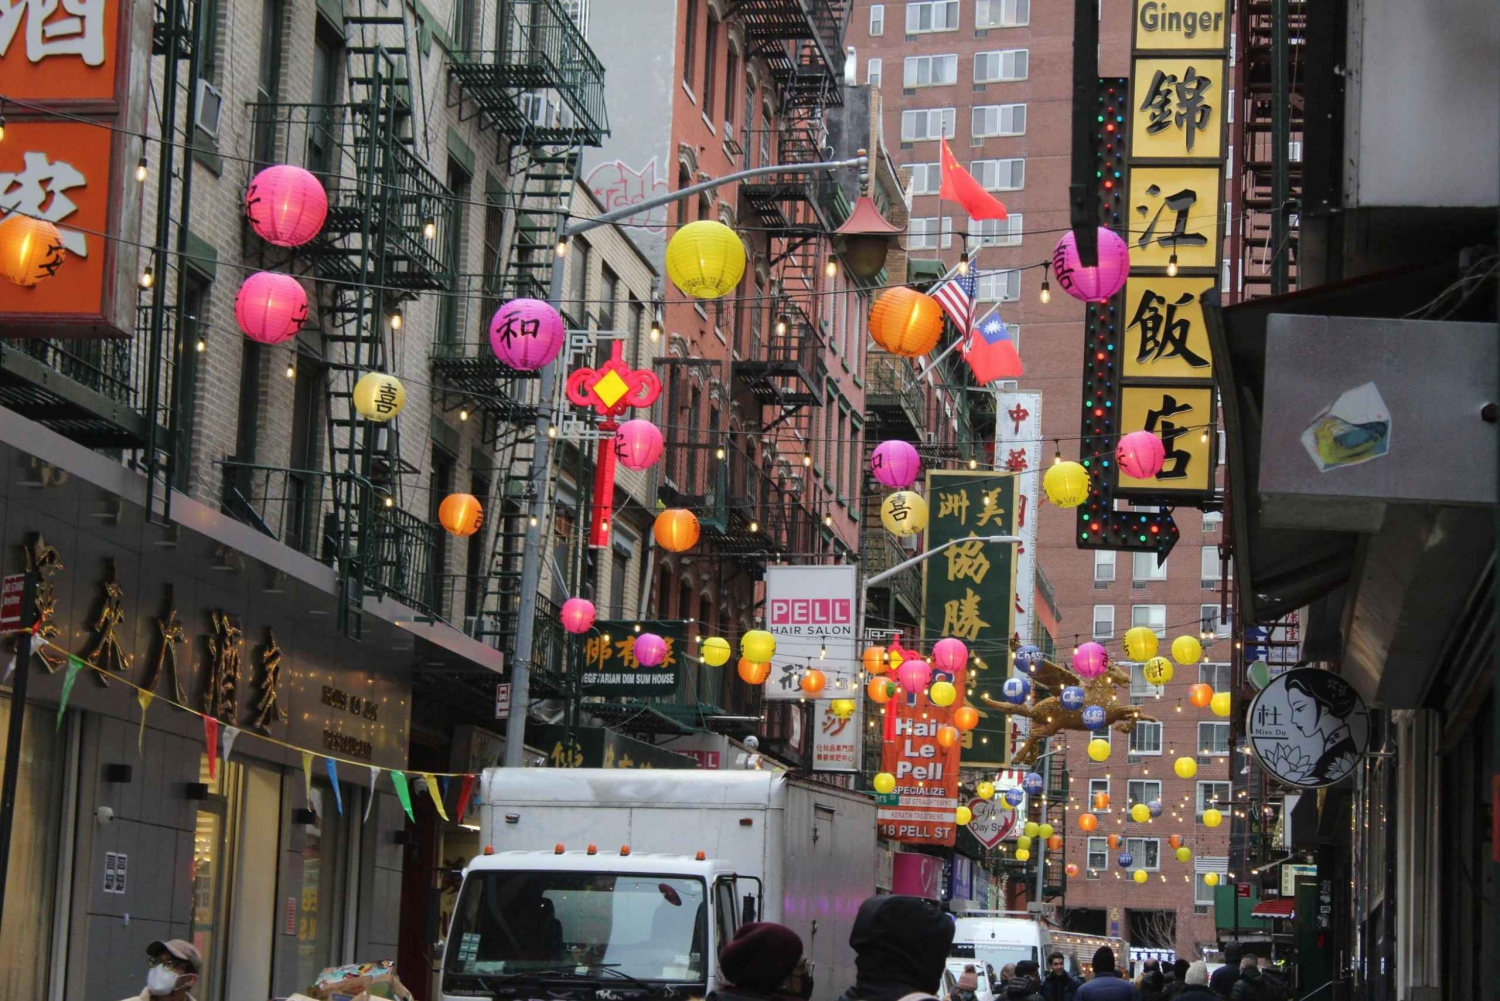 Chinatown, Little Italy, and the Lower East Side